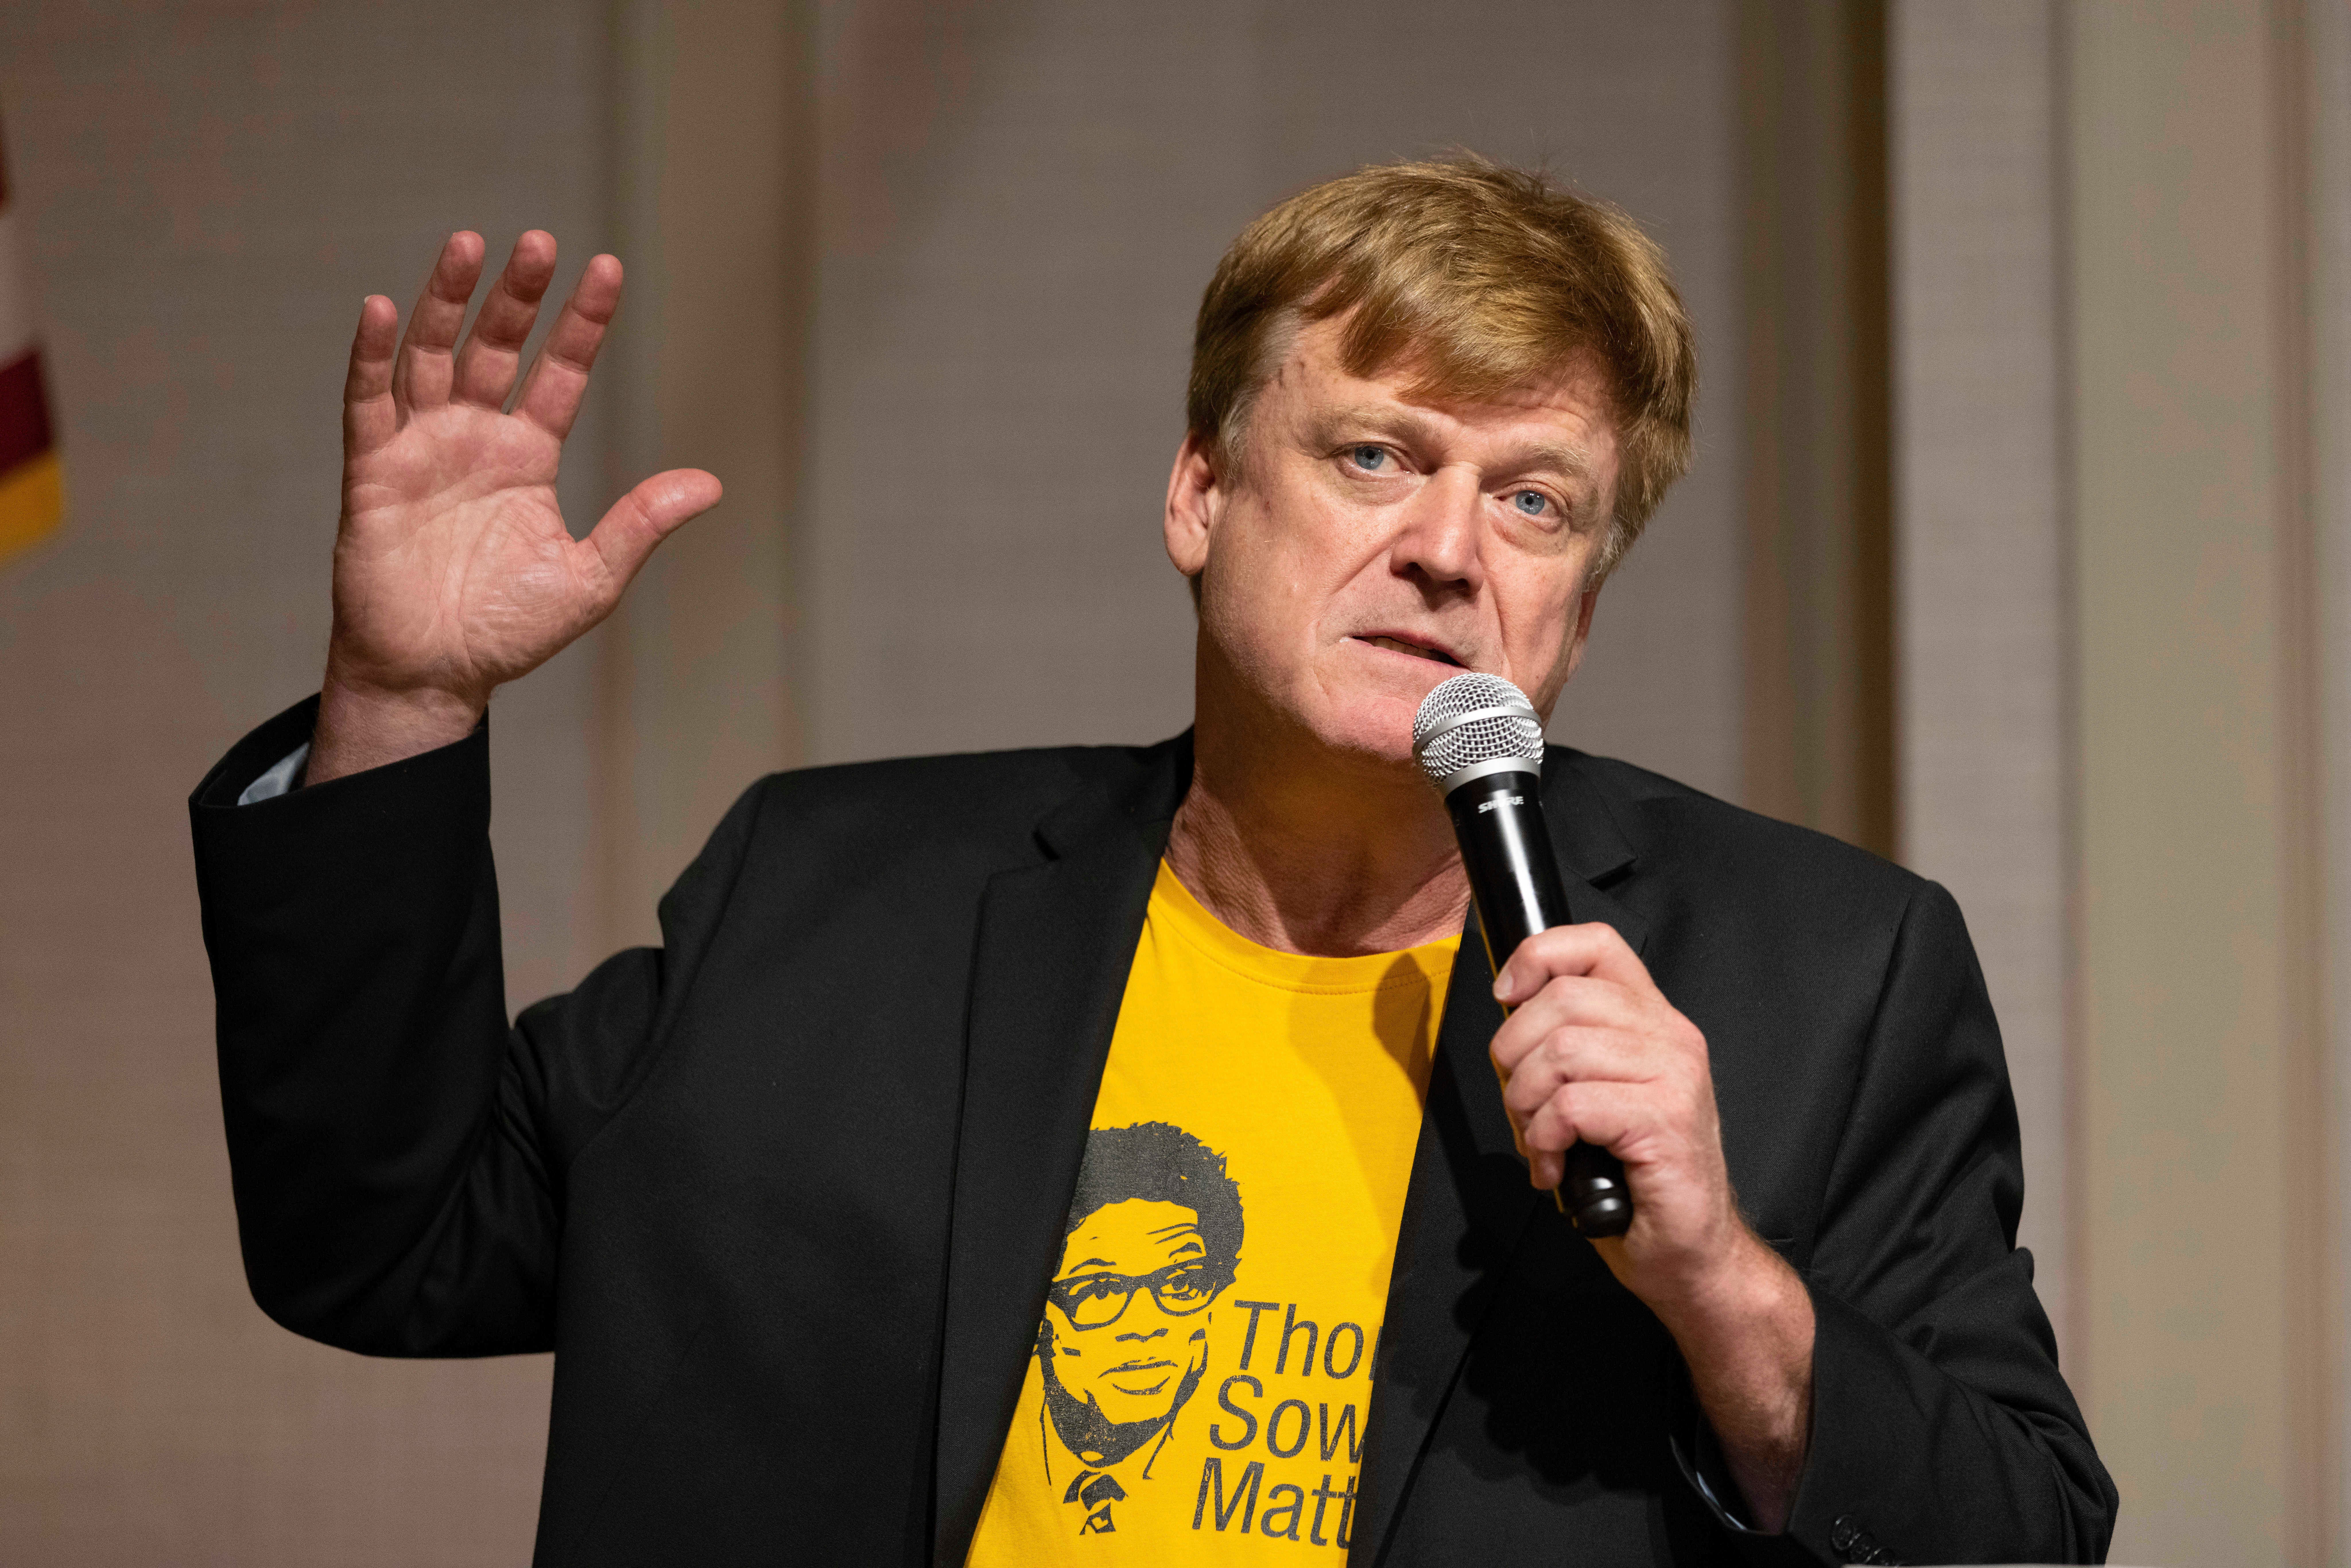 Patrick Byrne speaks during a panel discussion at the Nebraska Election Integrity Forum on 27 August, 2022